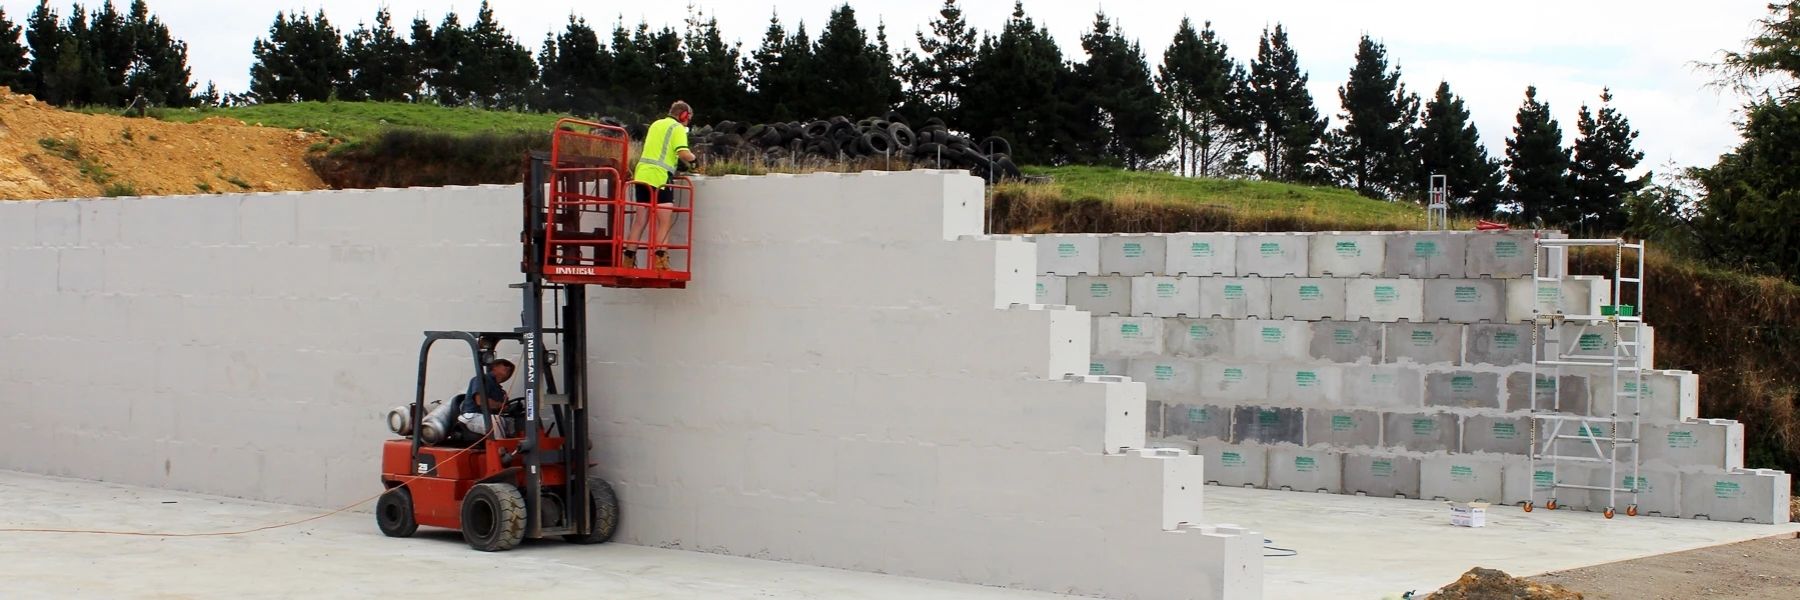 Man installing vertical reinforcing in an Interbloc silage bunker